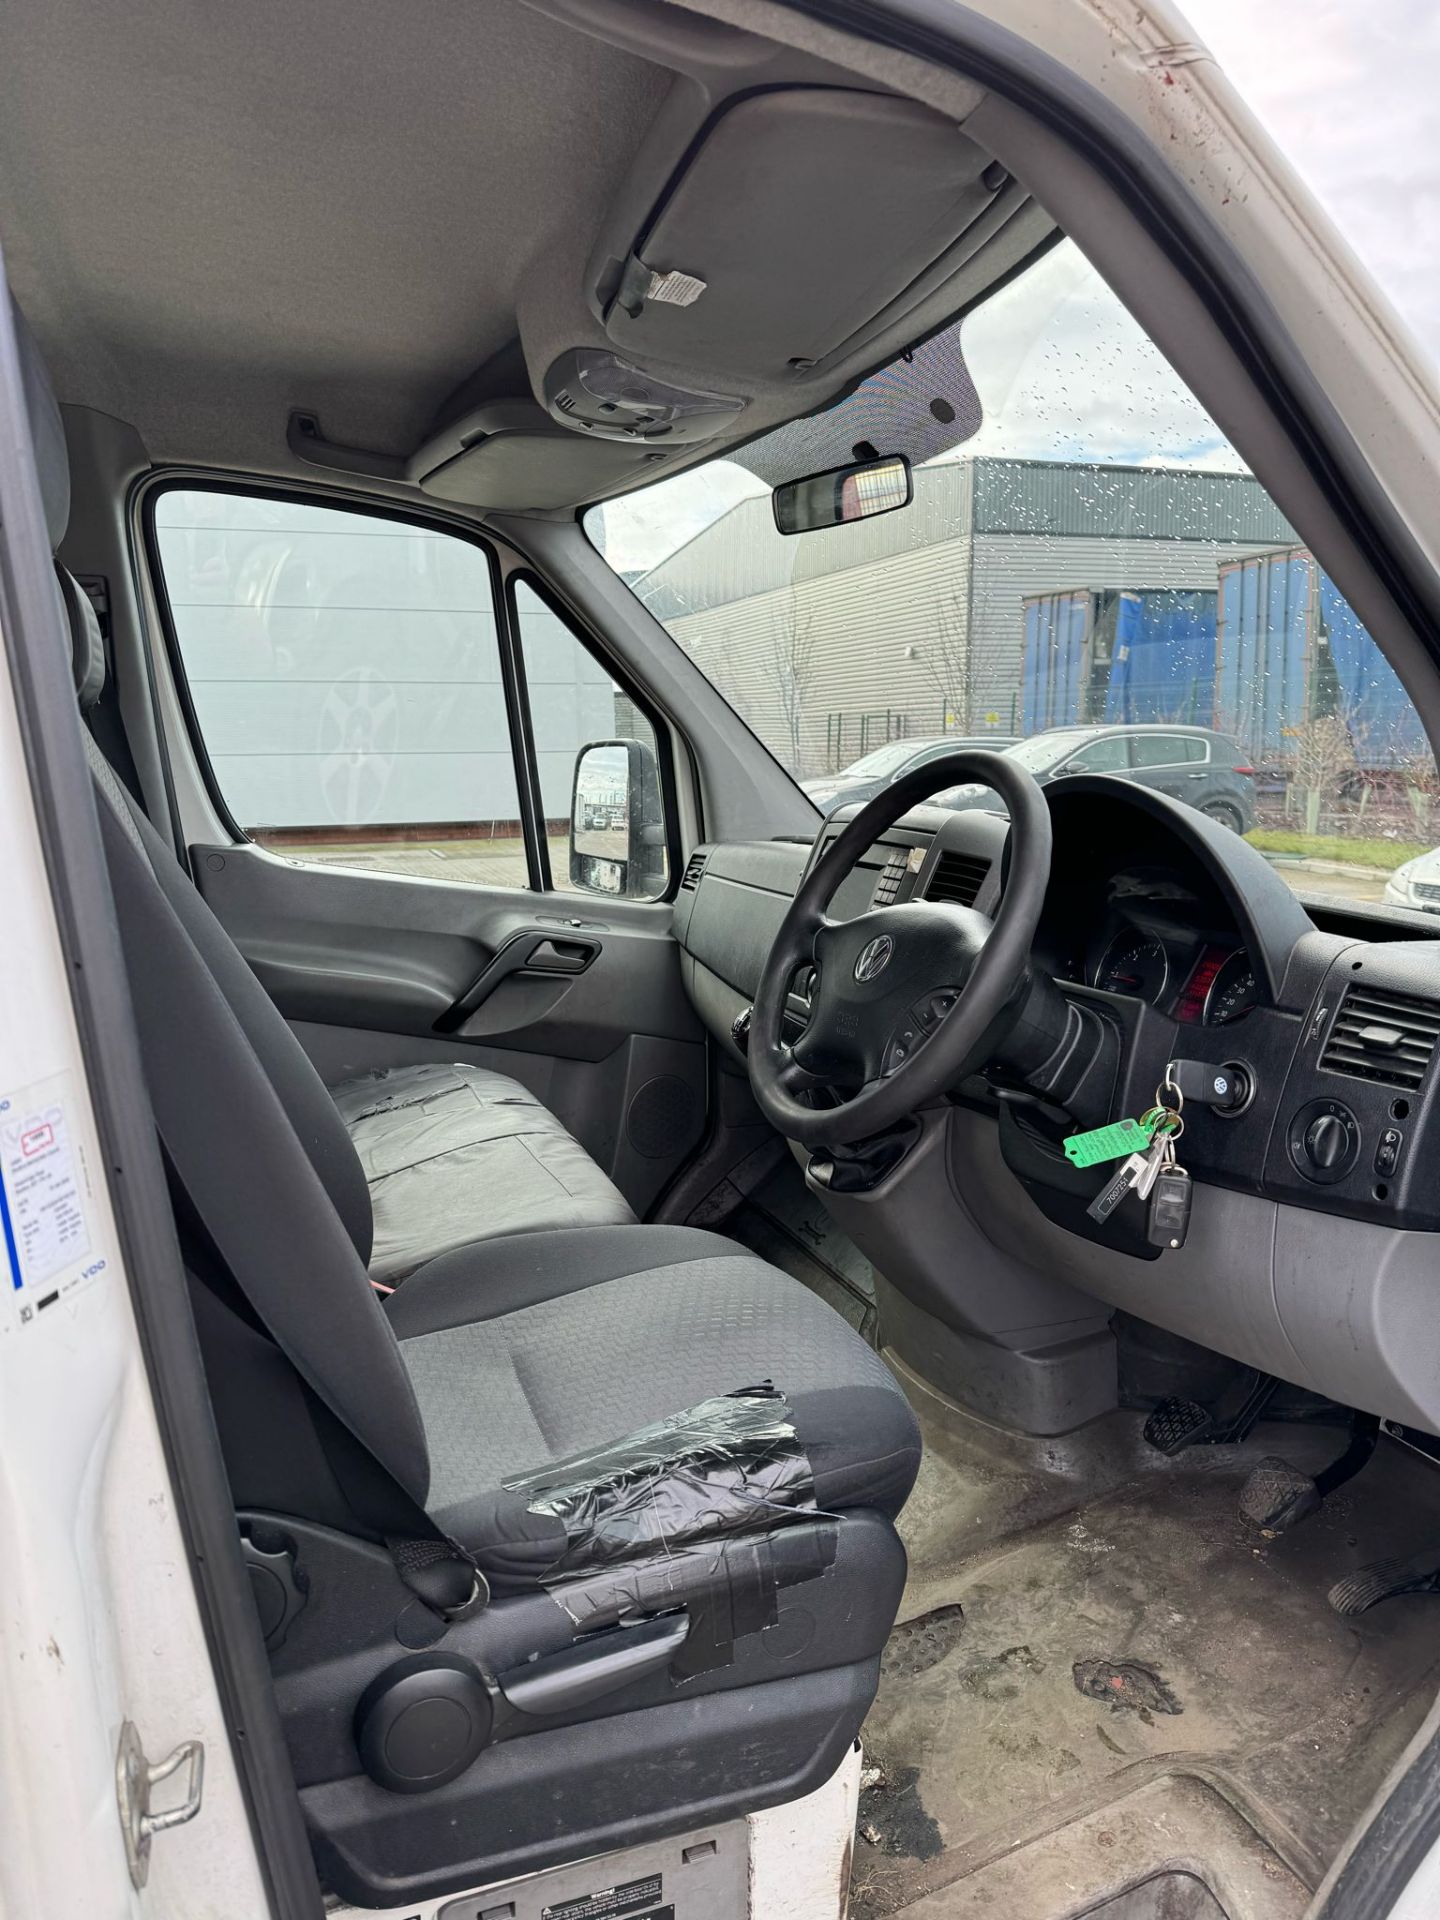 2013 - Volkswagen Crafter, Caged Tipper (Ex-Council Owned & Maintained) - Image 20 of 25